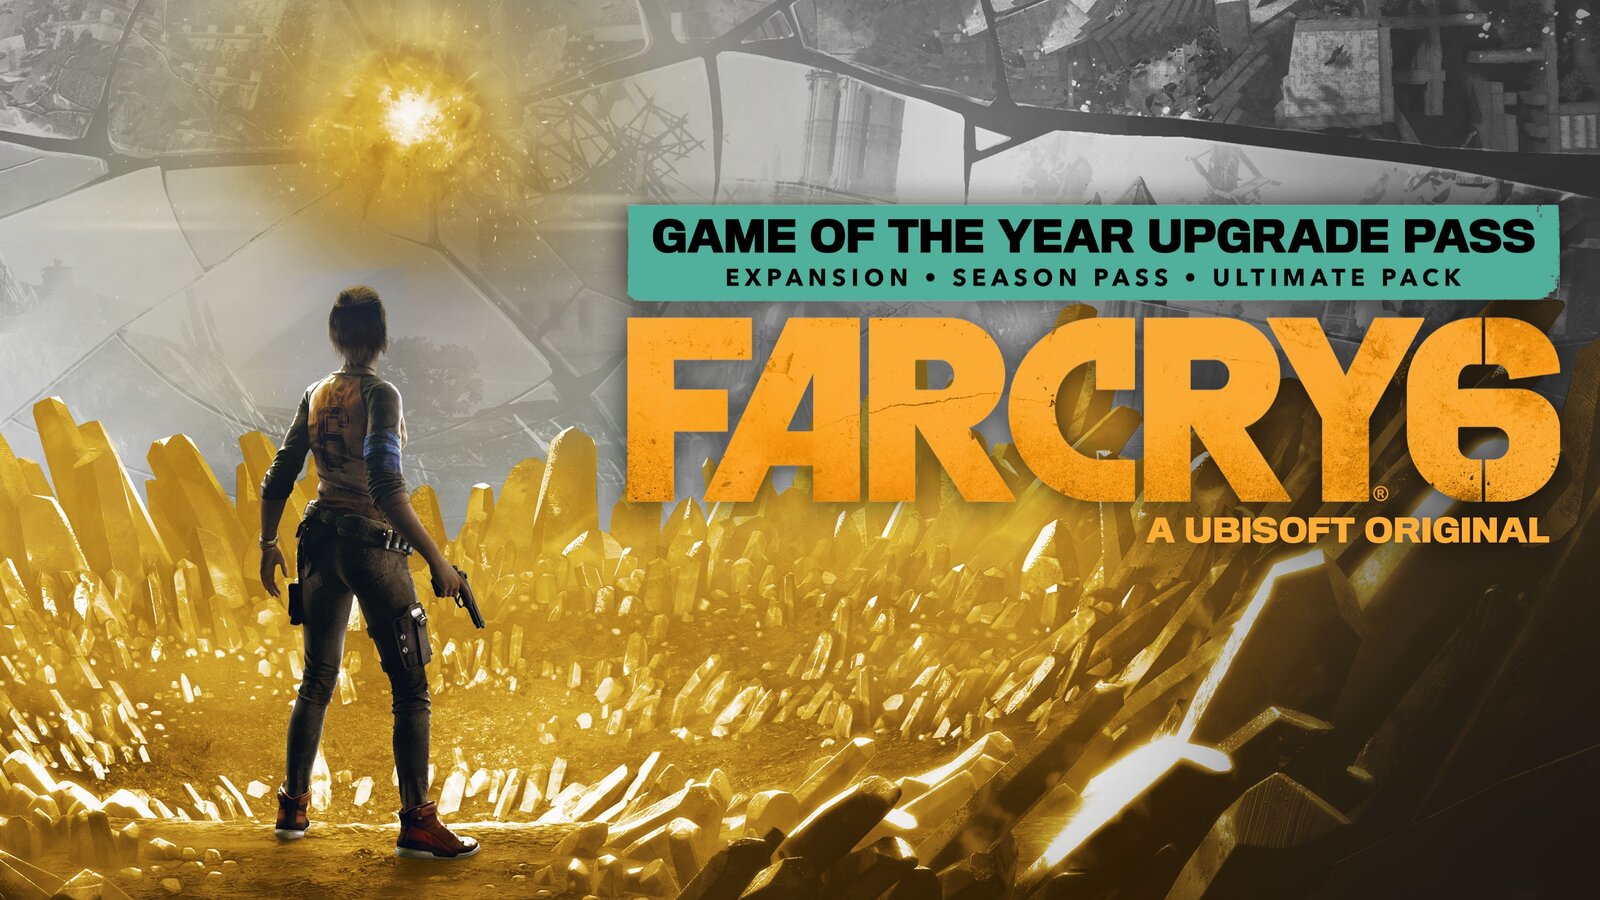 Far Cry 6 - Game of the Year Upgrade Pass